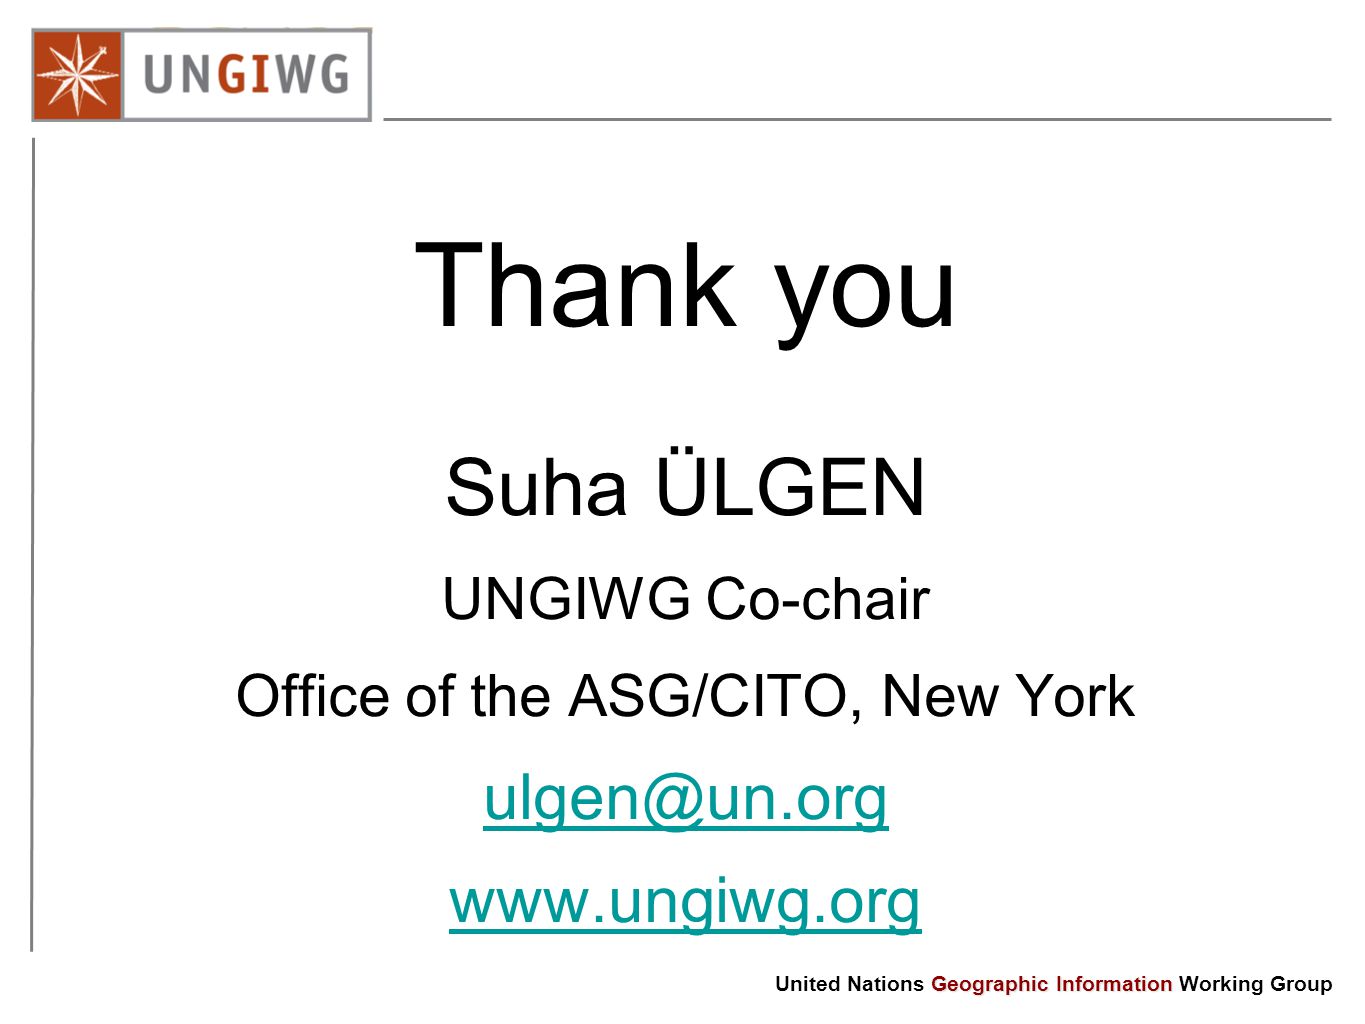 Thank you Suha ÜLGEN UNGIWG Co-chair Office of the ASG/CITO, New York